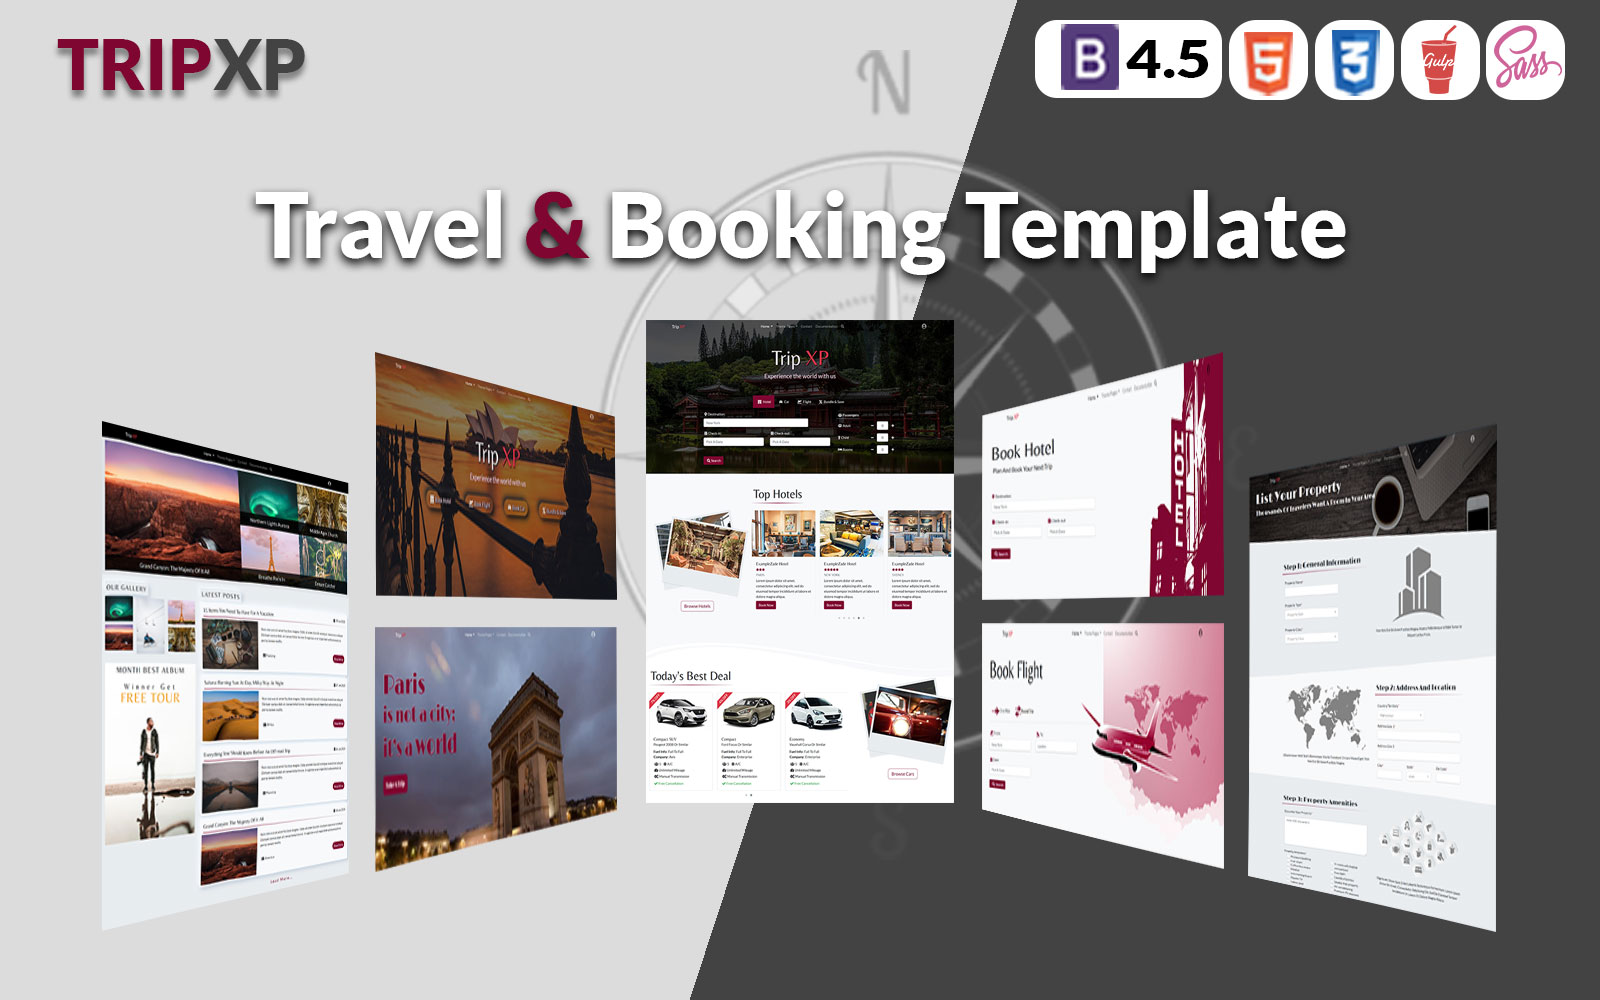 Trip XP - Bootstrap Travel and Booking Website Template